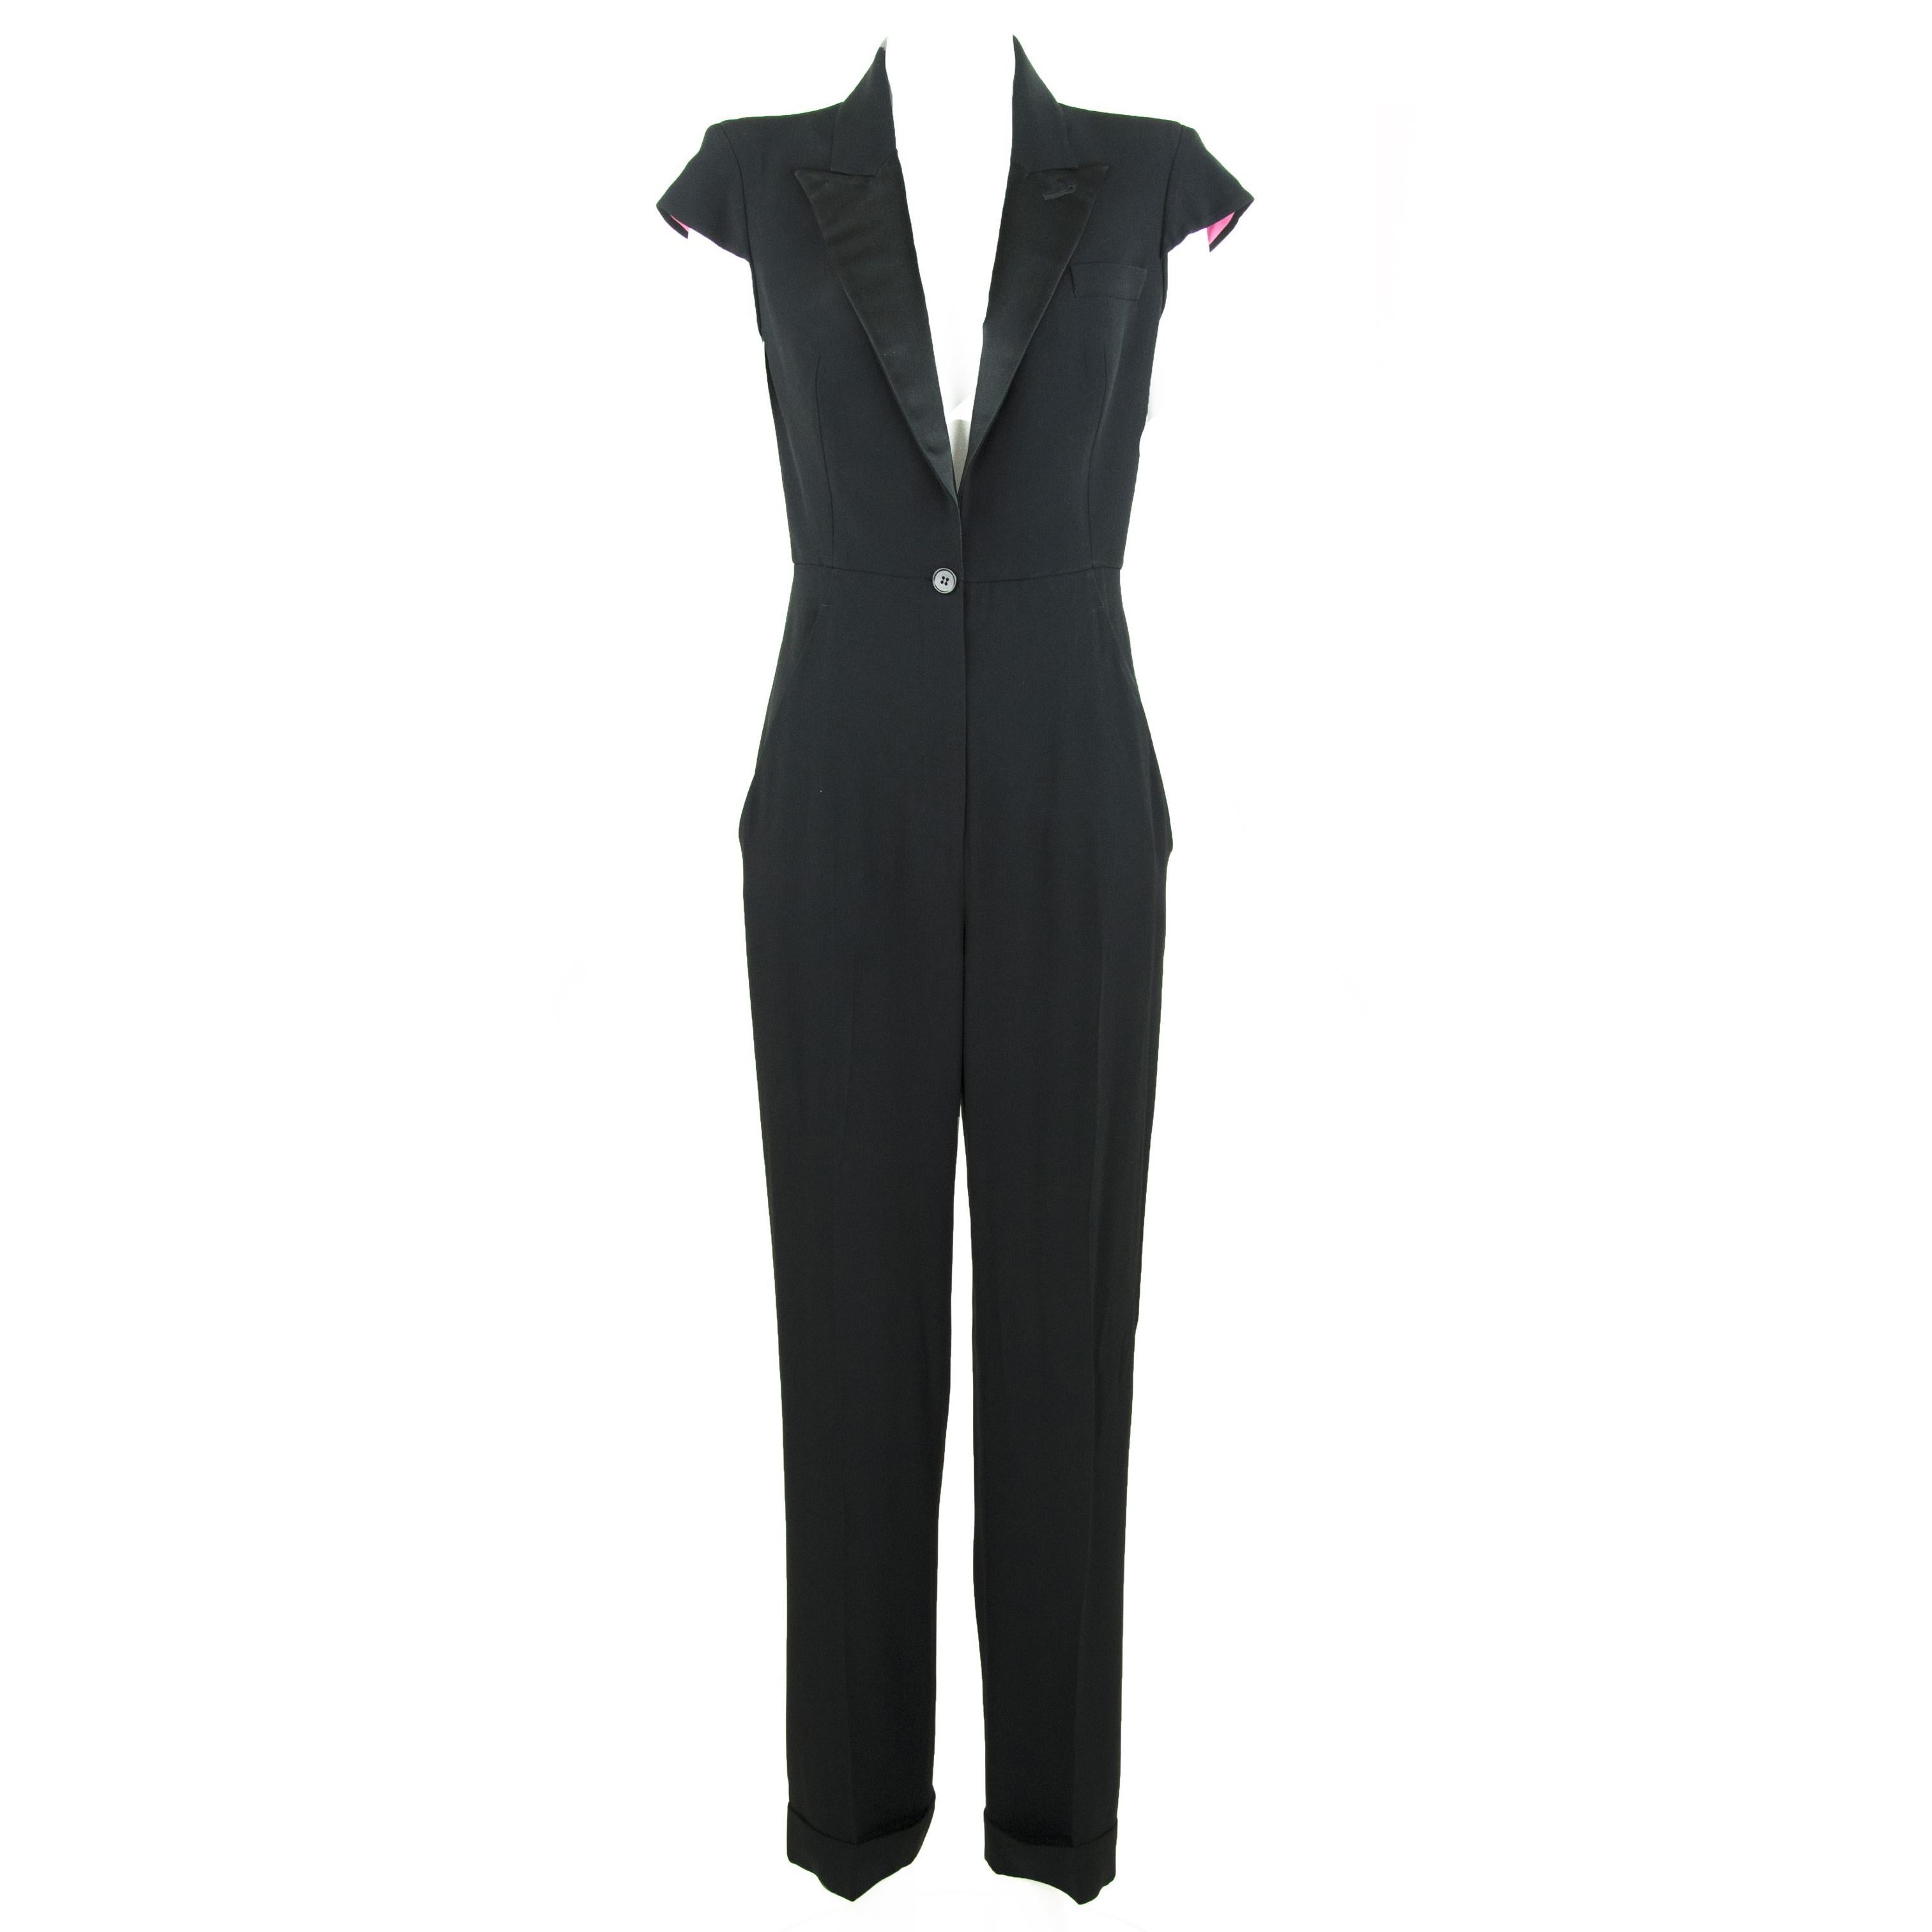 Alexander McQueen Black Jumpsuit with Satin Lapel Spring 2008 Collection For Sale